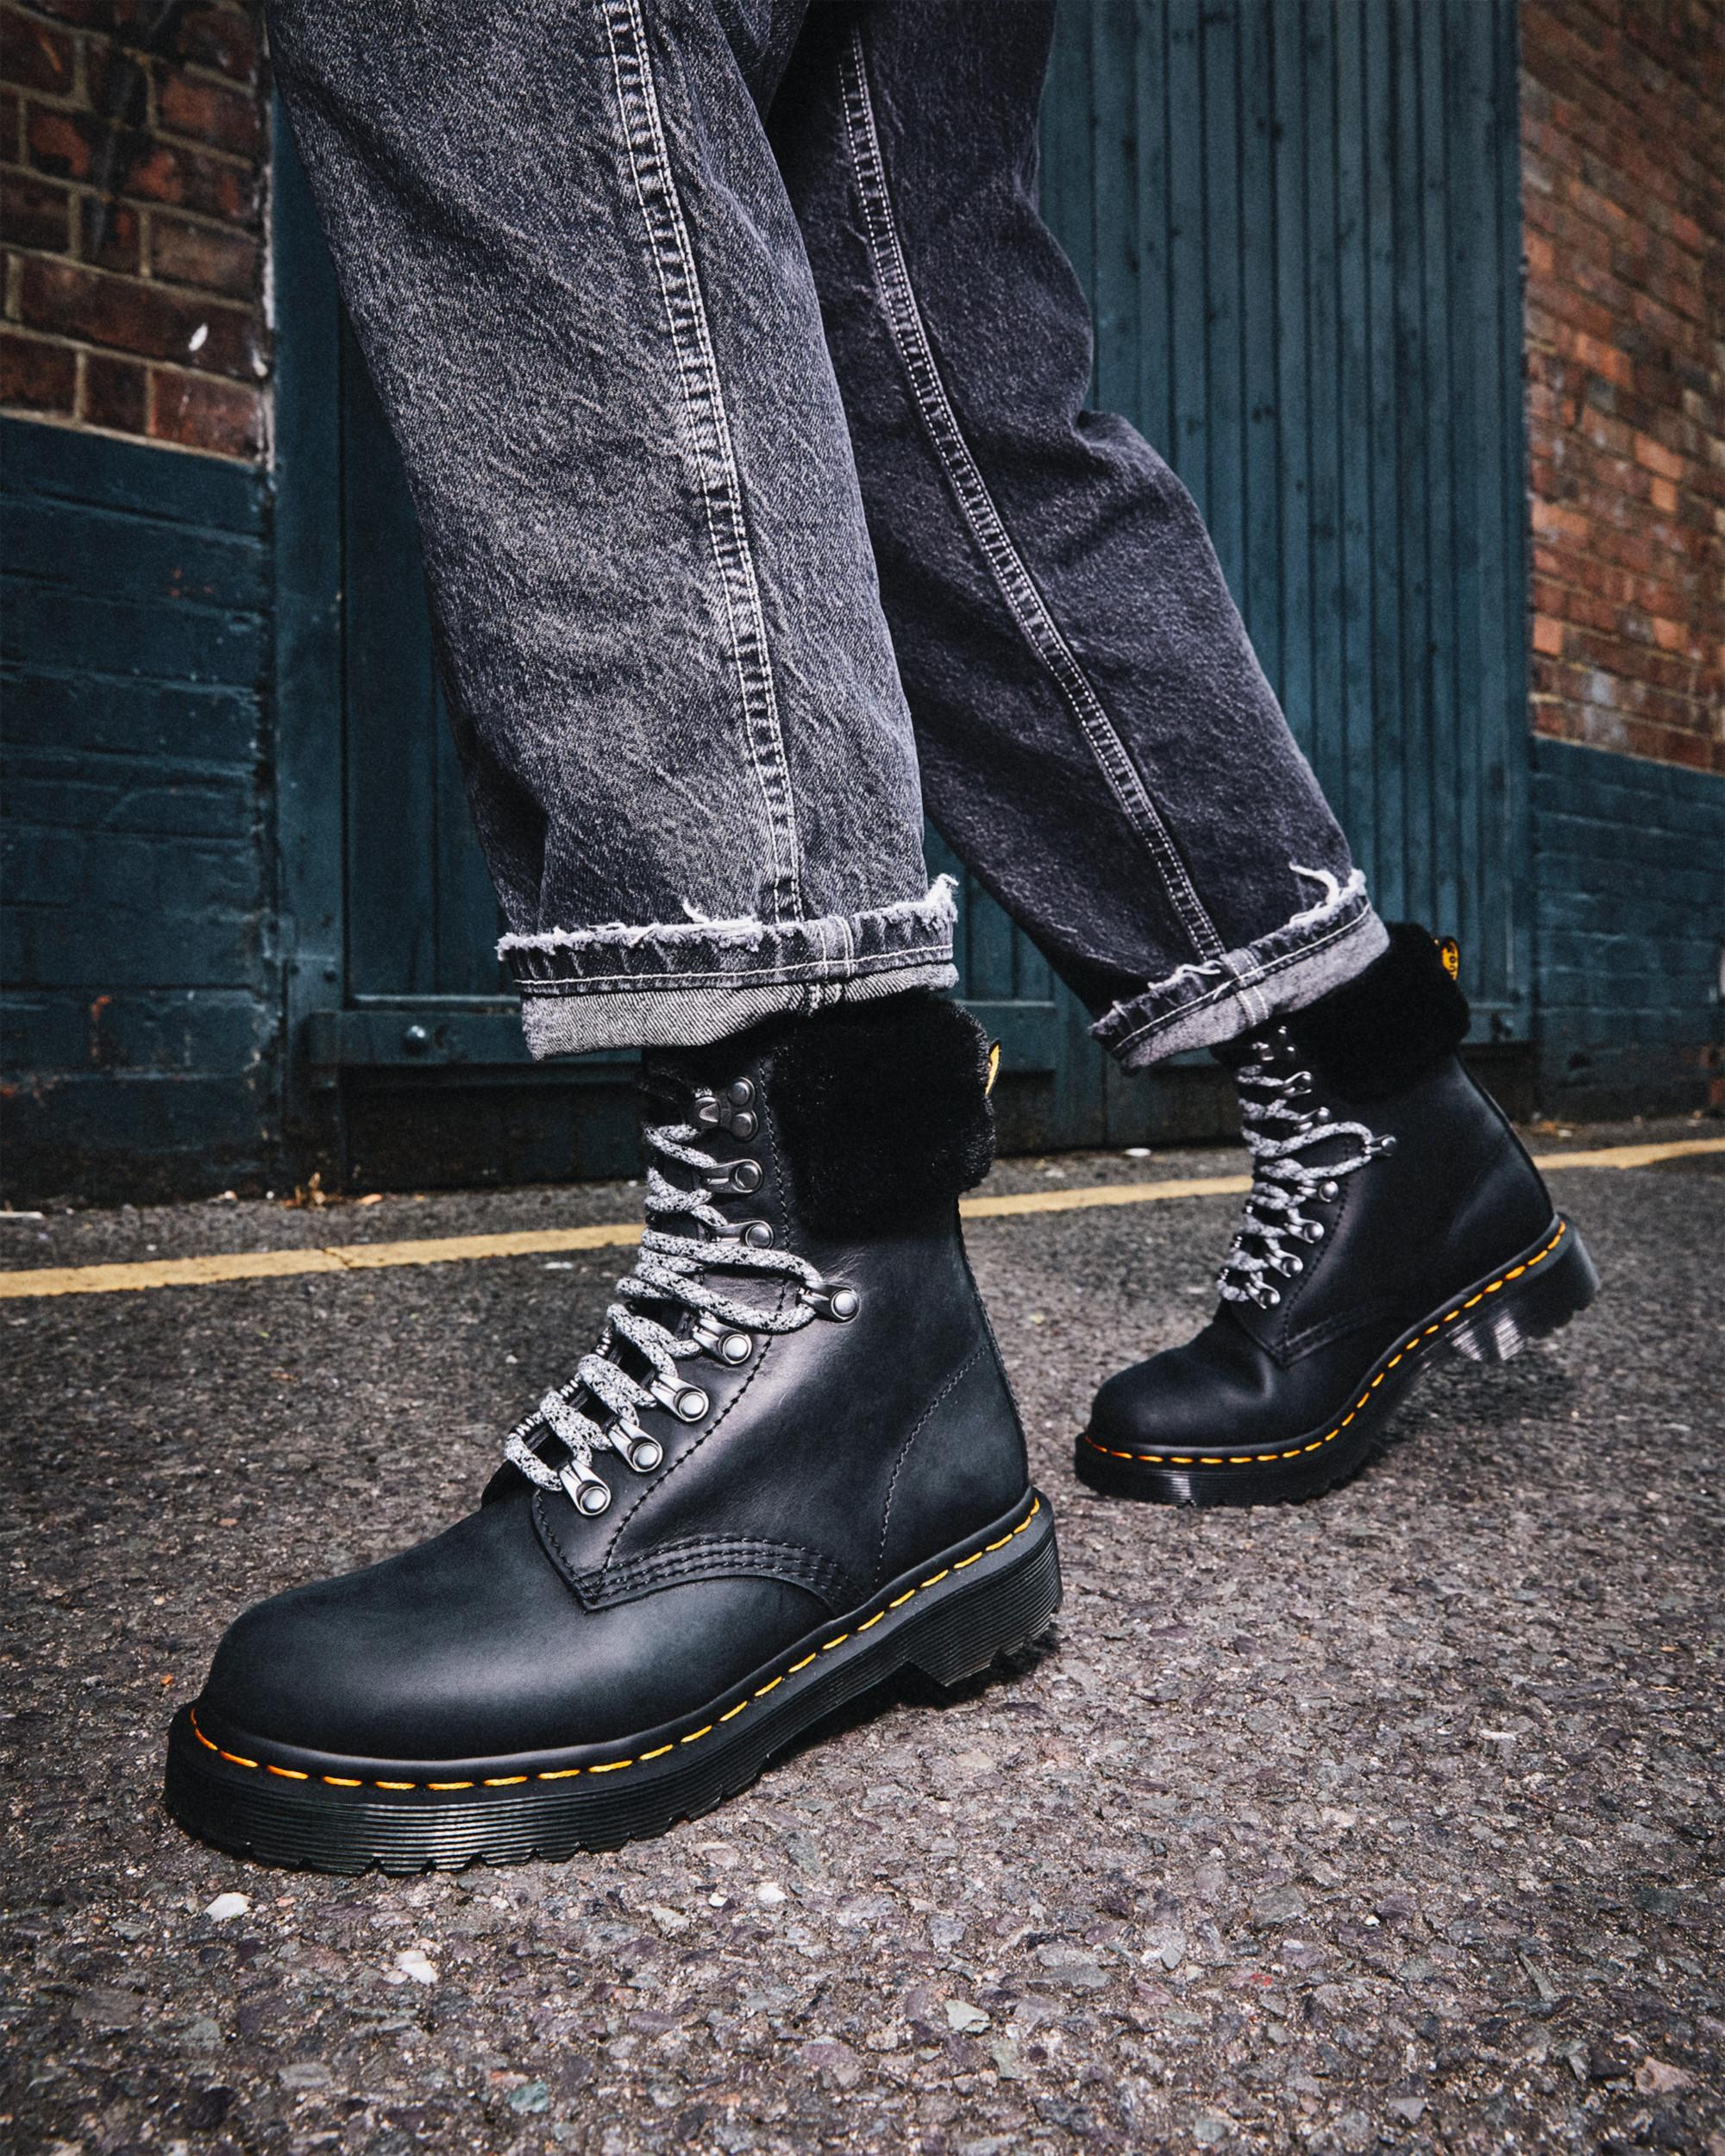 1460 Serena Collar Faux Fur Lined Lace Up Boots1460 Serena Collar Faux Fur Lined Lace Up Boots Dr. Martens